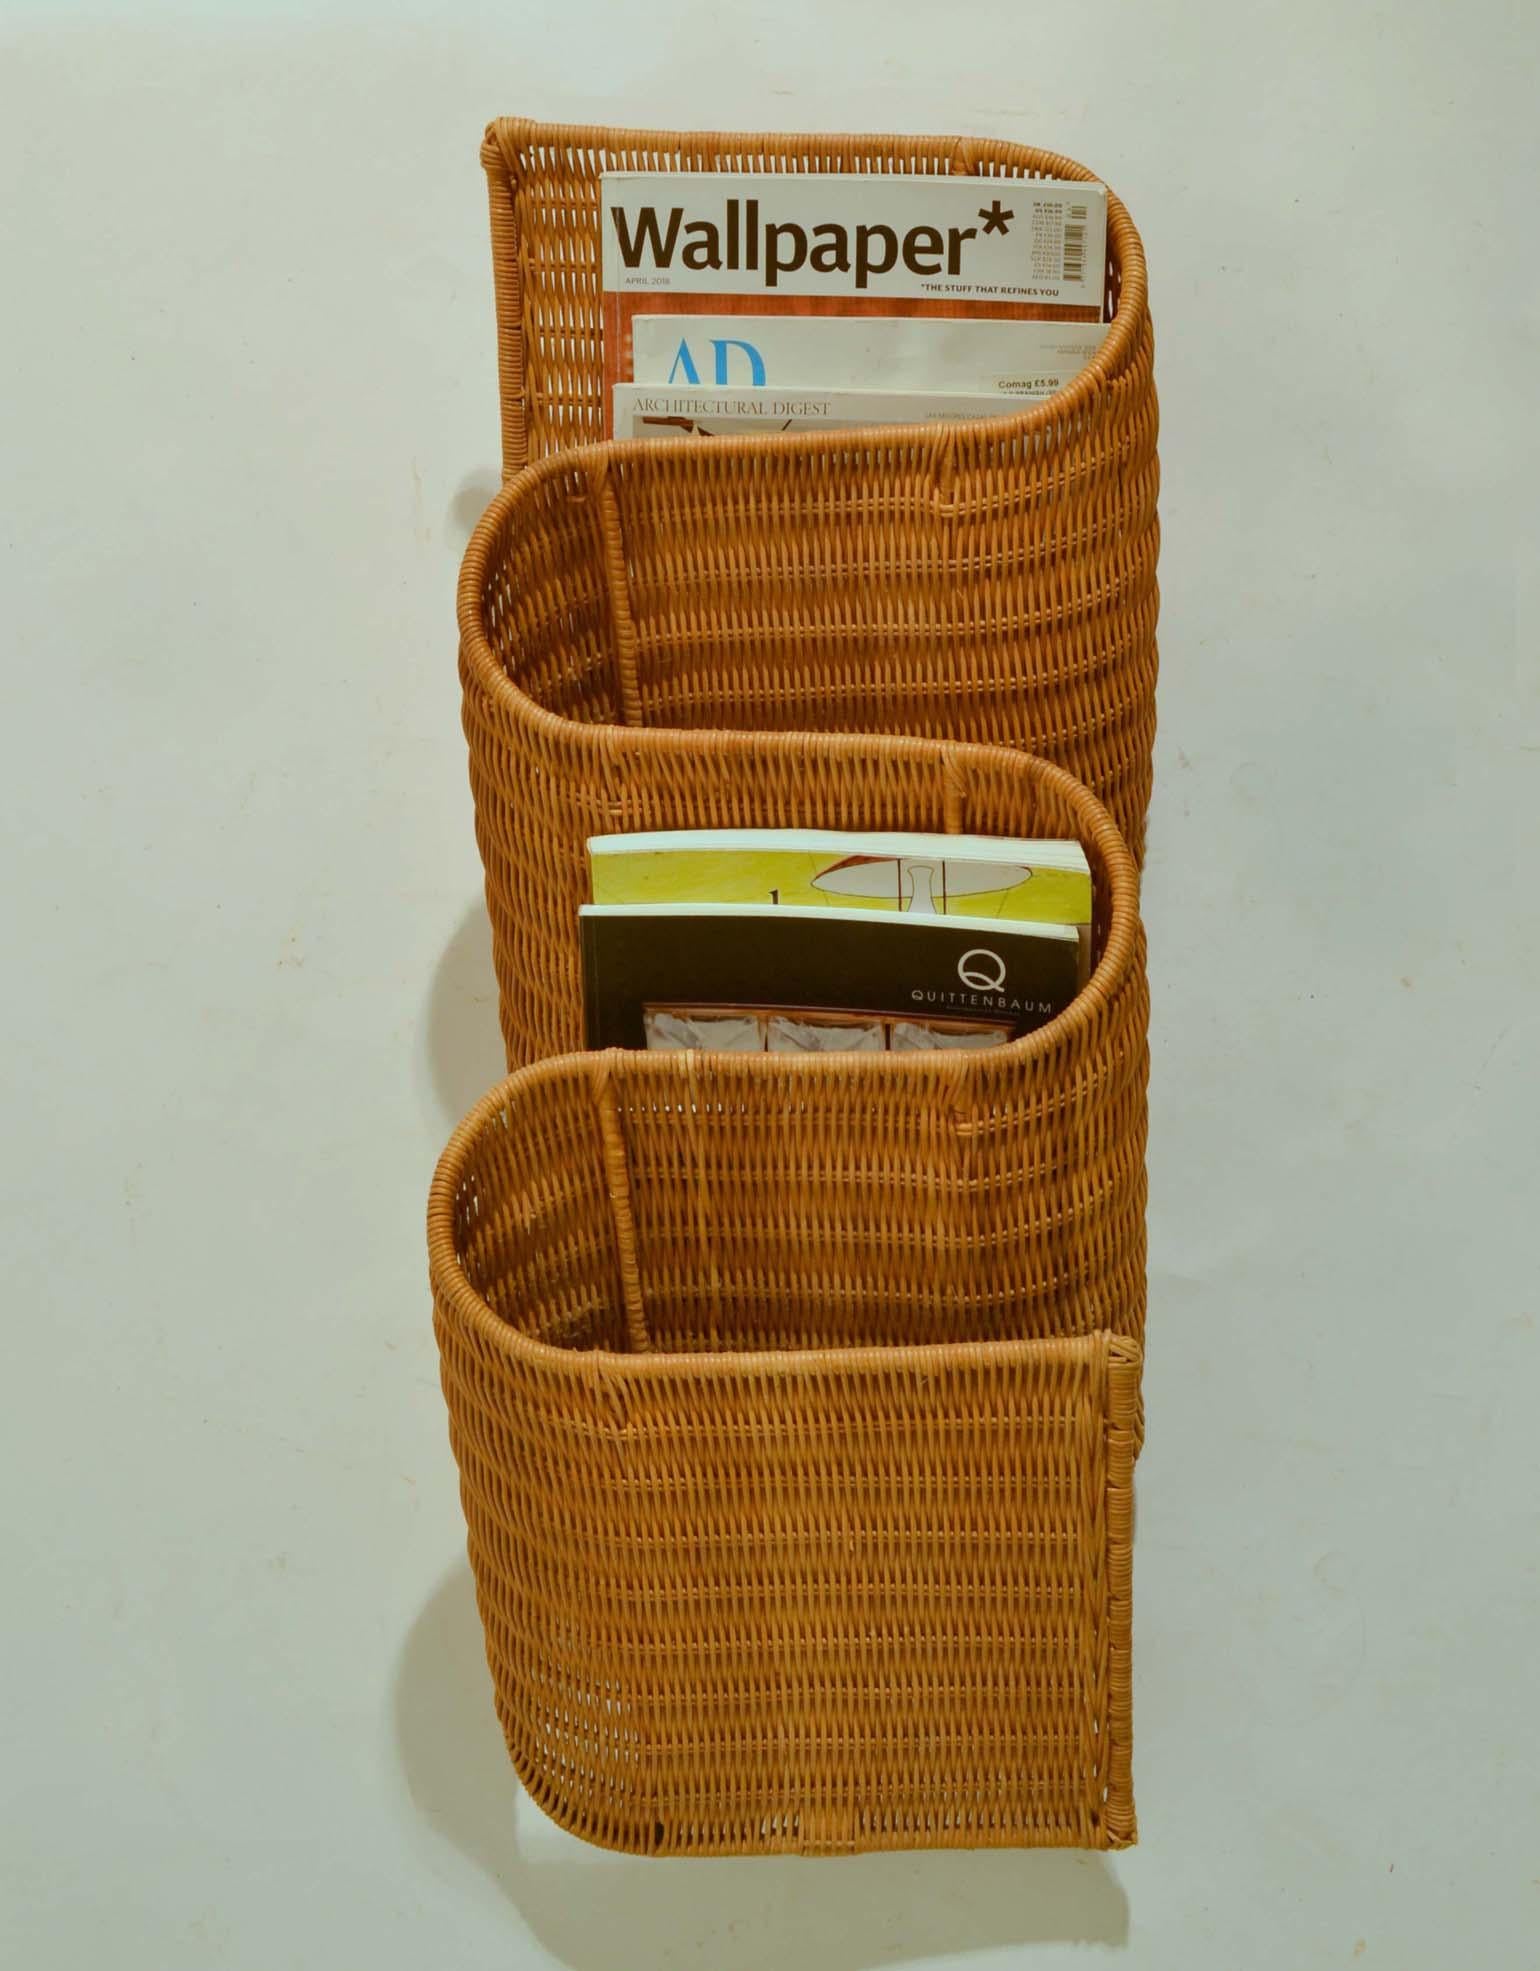 Wall mounted rattan magazine holders are very efficient and decorative, the way they snake along the wall they each have 4 sections for magazines. They are made in Italy, 1970s.